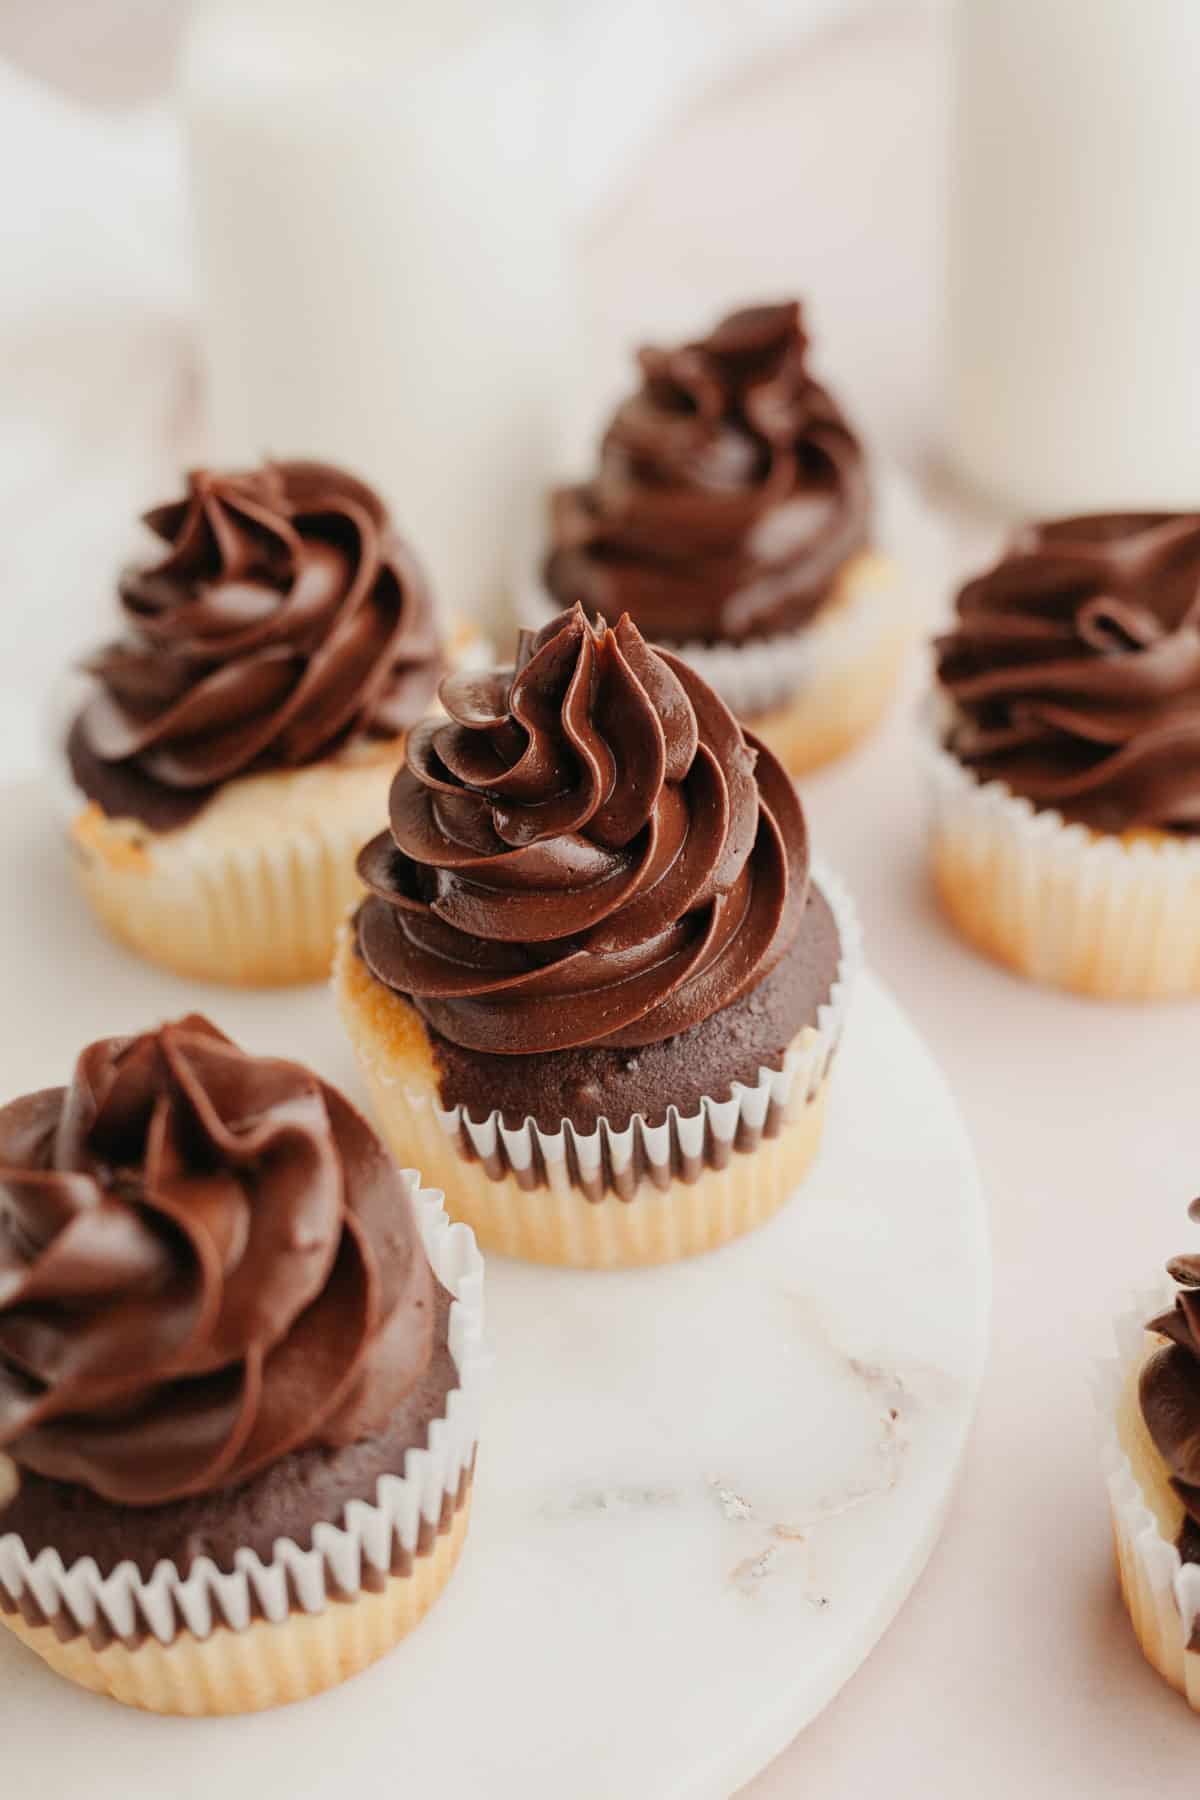 Chocolate and vanilla cupcakes with chocolate whipped ganache frosting.